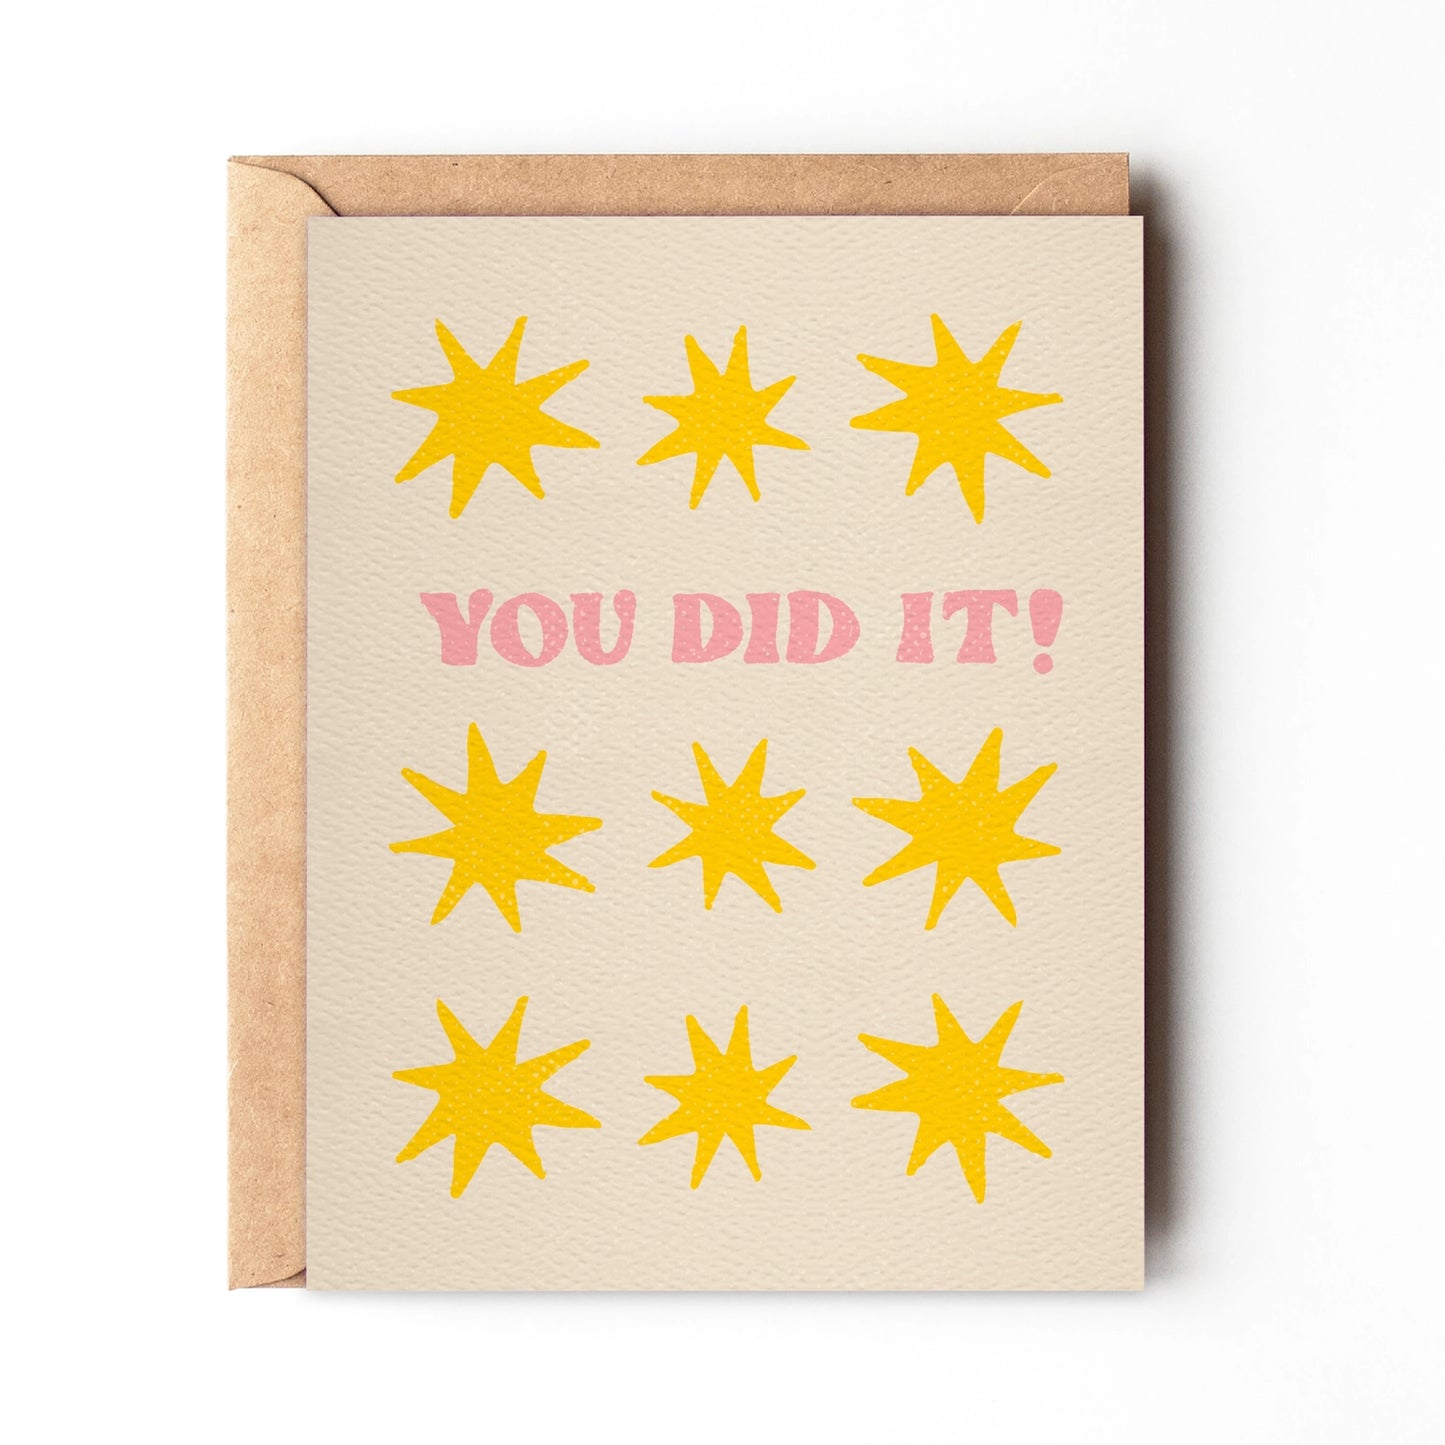 A bright and happy card to congratulate the big (and little!) life moments.   ☀ Size 4.25" x 5.5"; Blank inside  ☀ Digital print on a quality, felt textured card  ☀100% recycled envelope  ☀ Packed in an eco-friendly biodegradable clear sleeve  ☀ Made in the USA